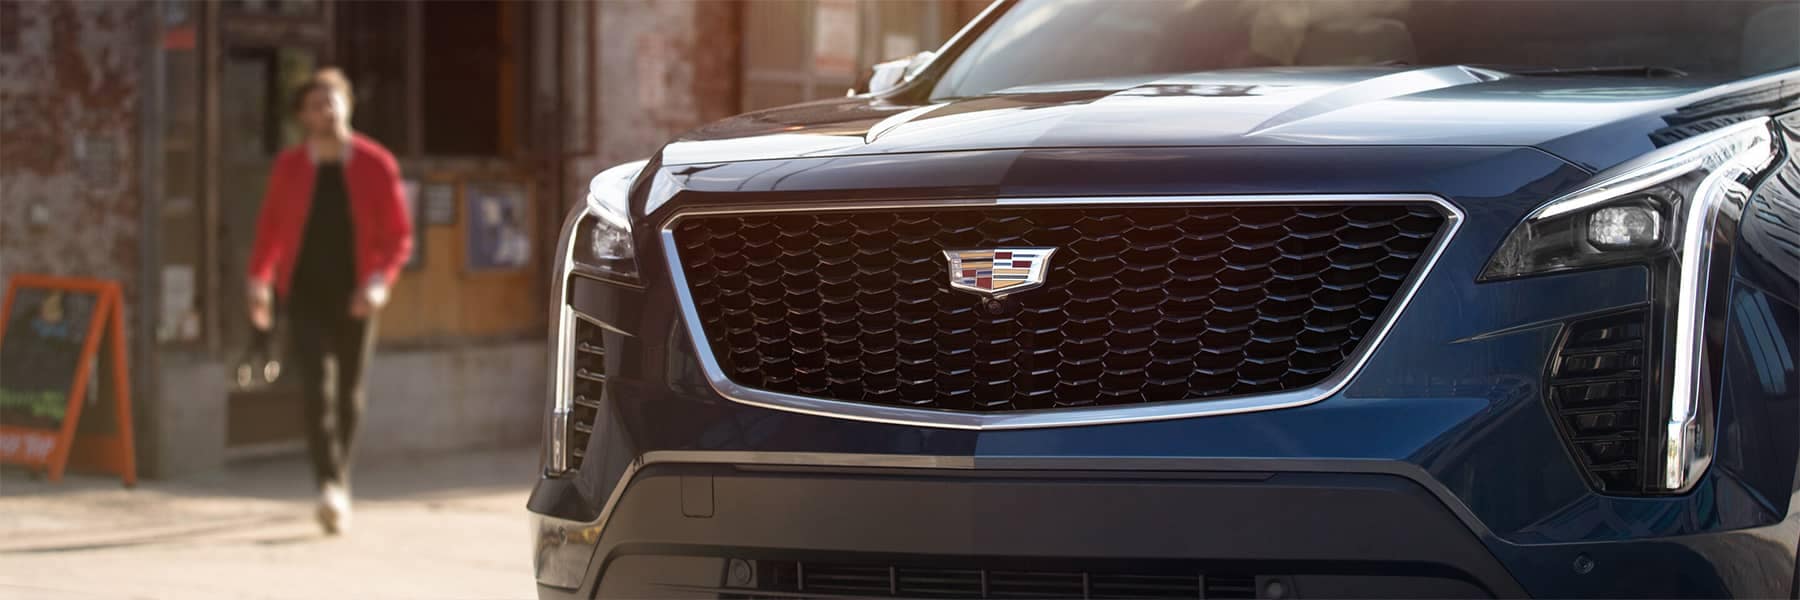 2019 Cadillac XT4 Crossover Front Grille